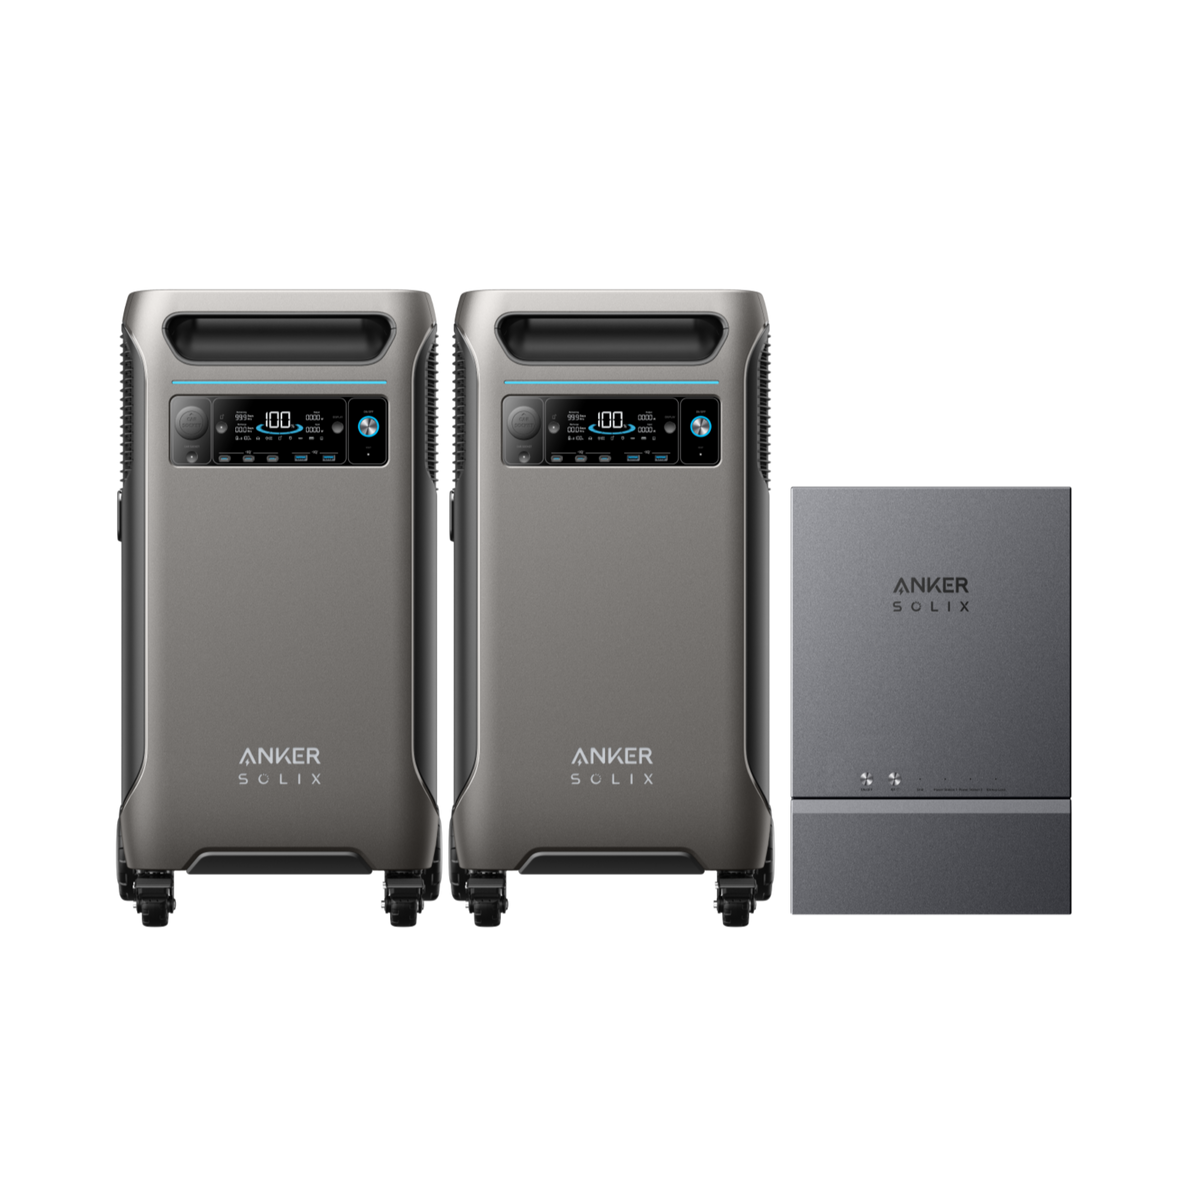 Anker SOLIX Dual F3800 Home Power System